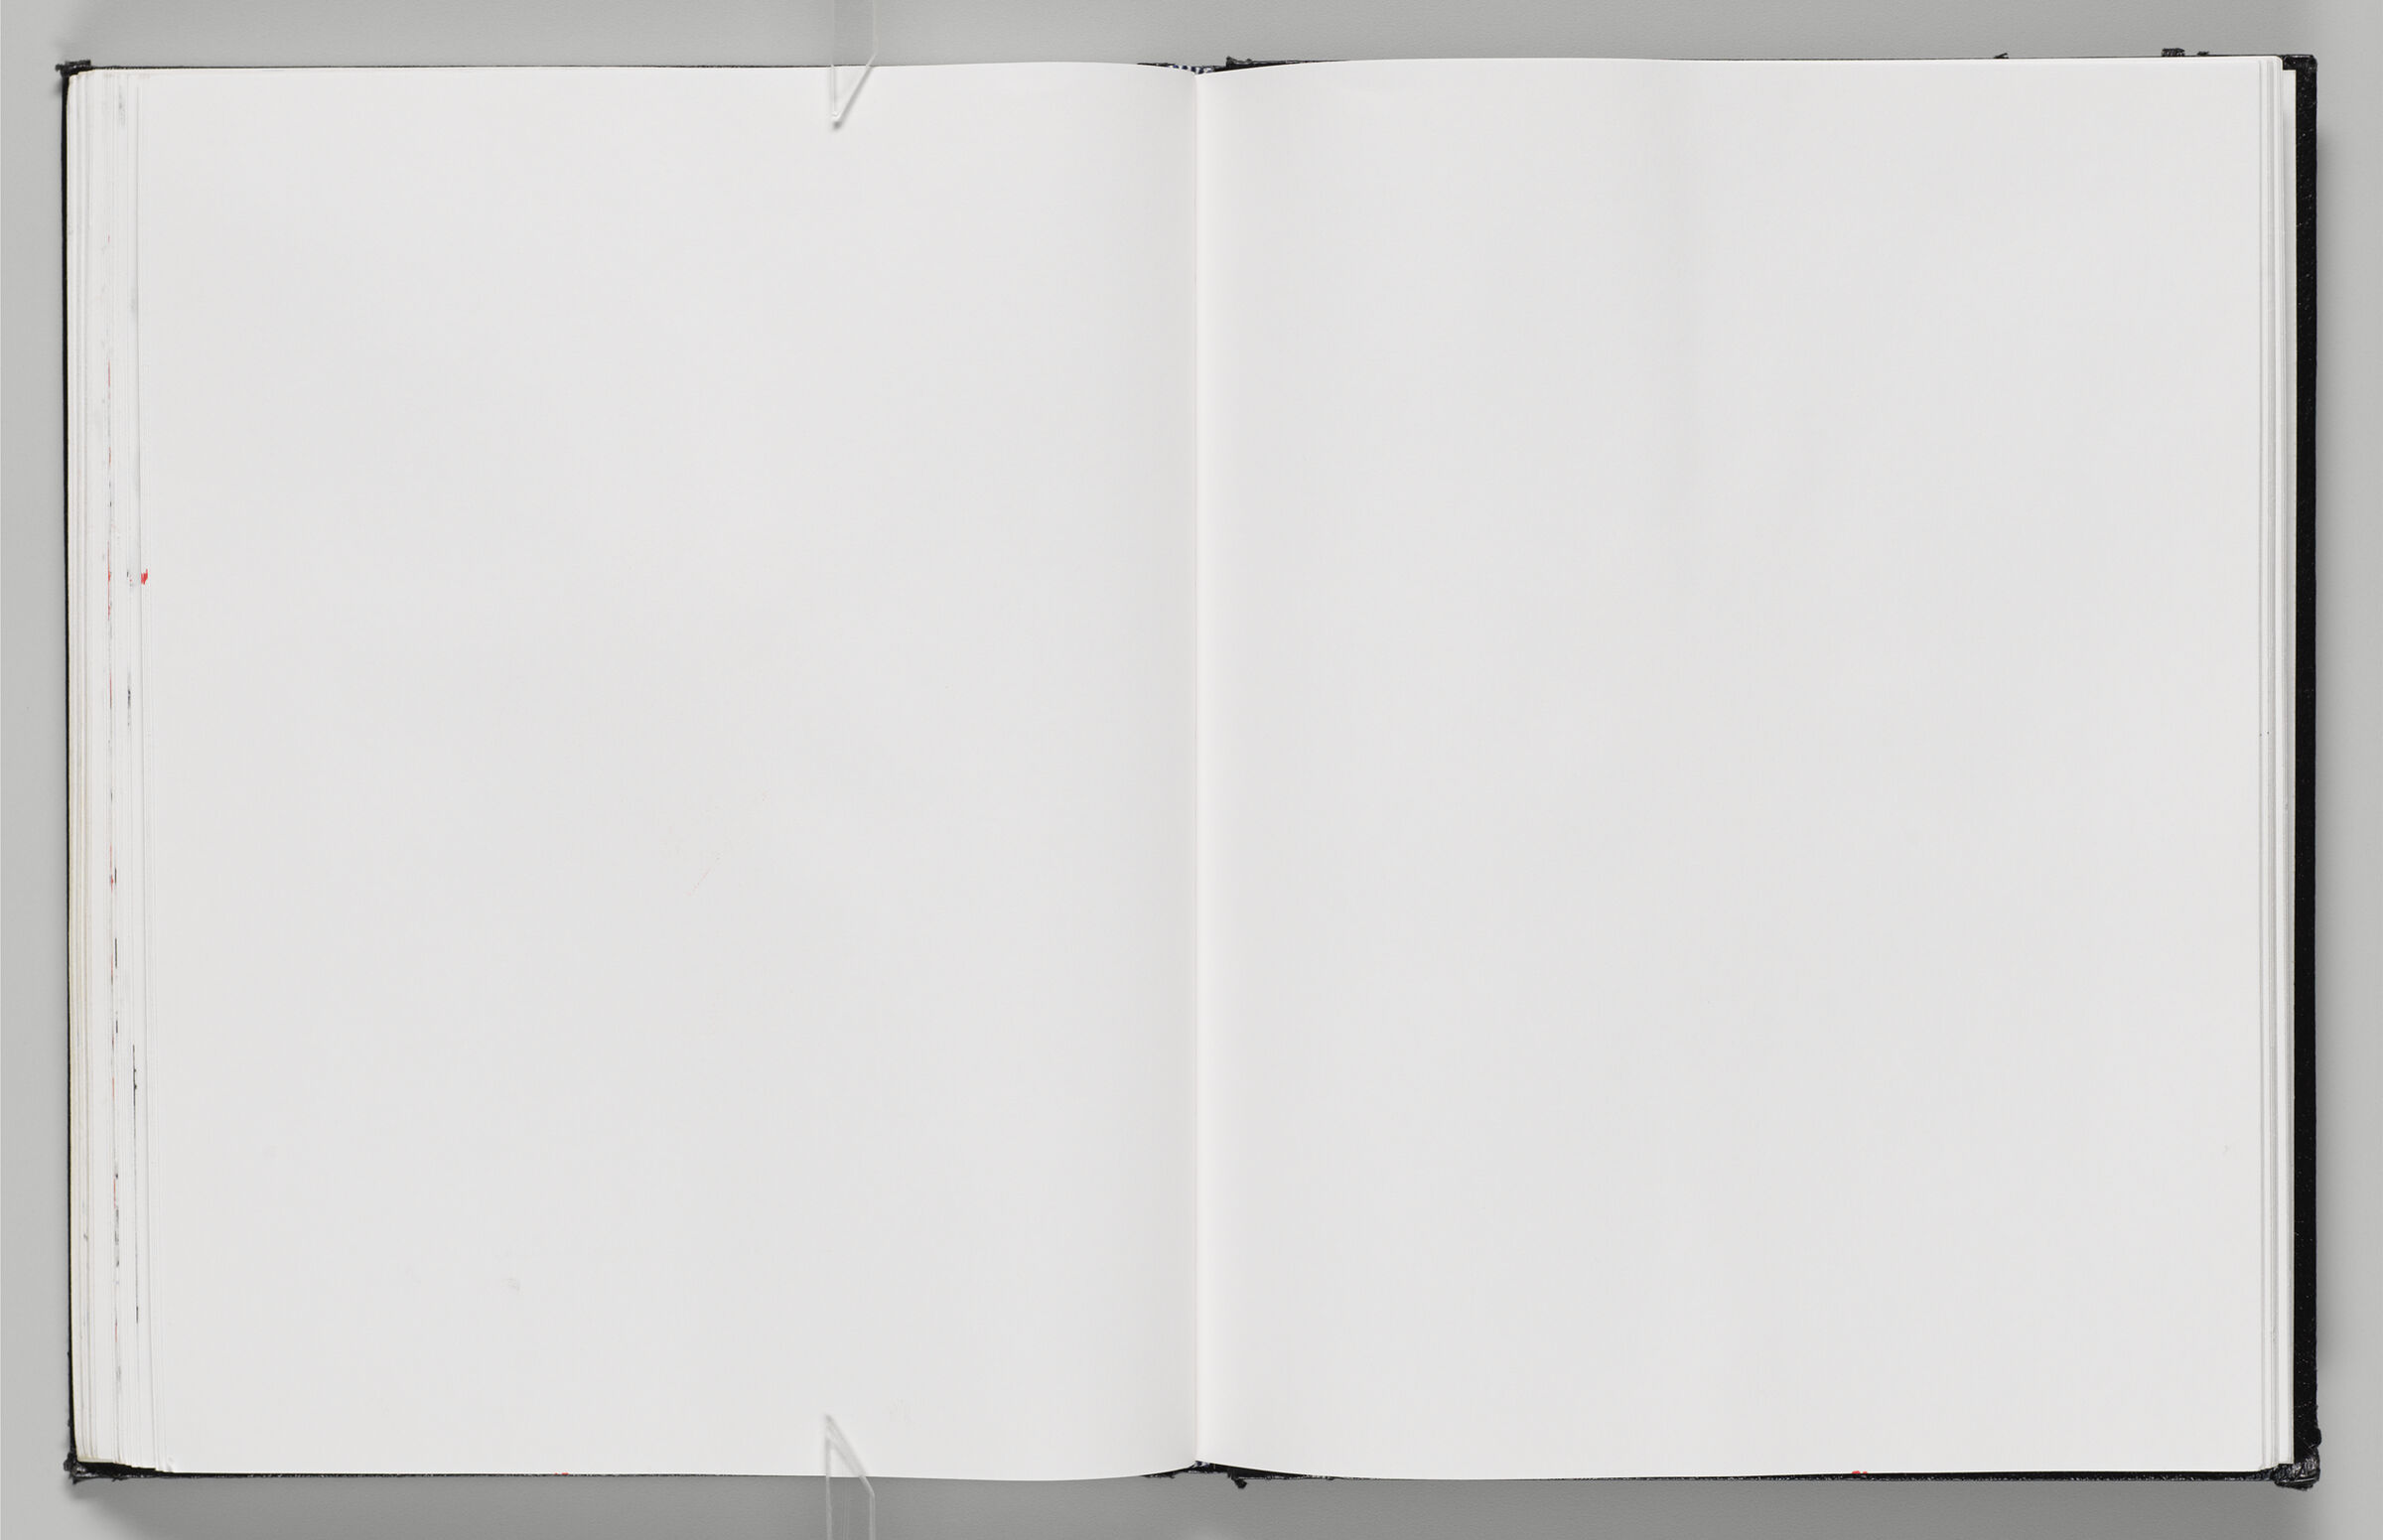 Untitled (Blank, Left Page); Untitled (Blank, Right Page)
